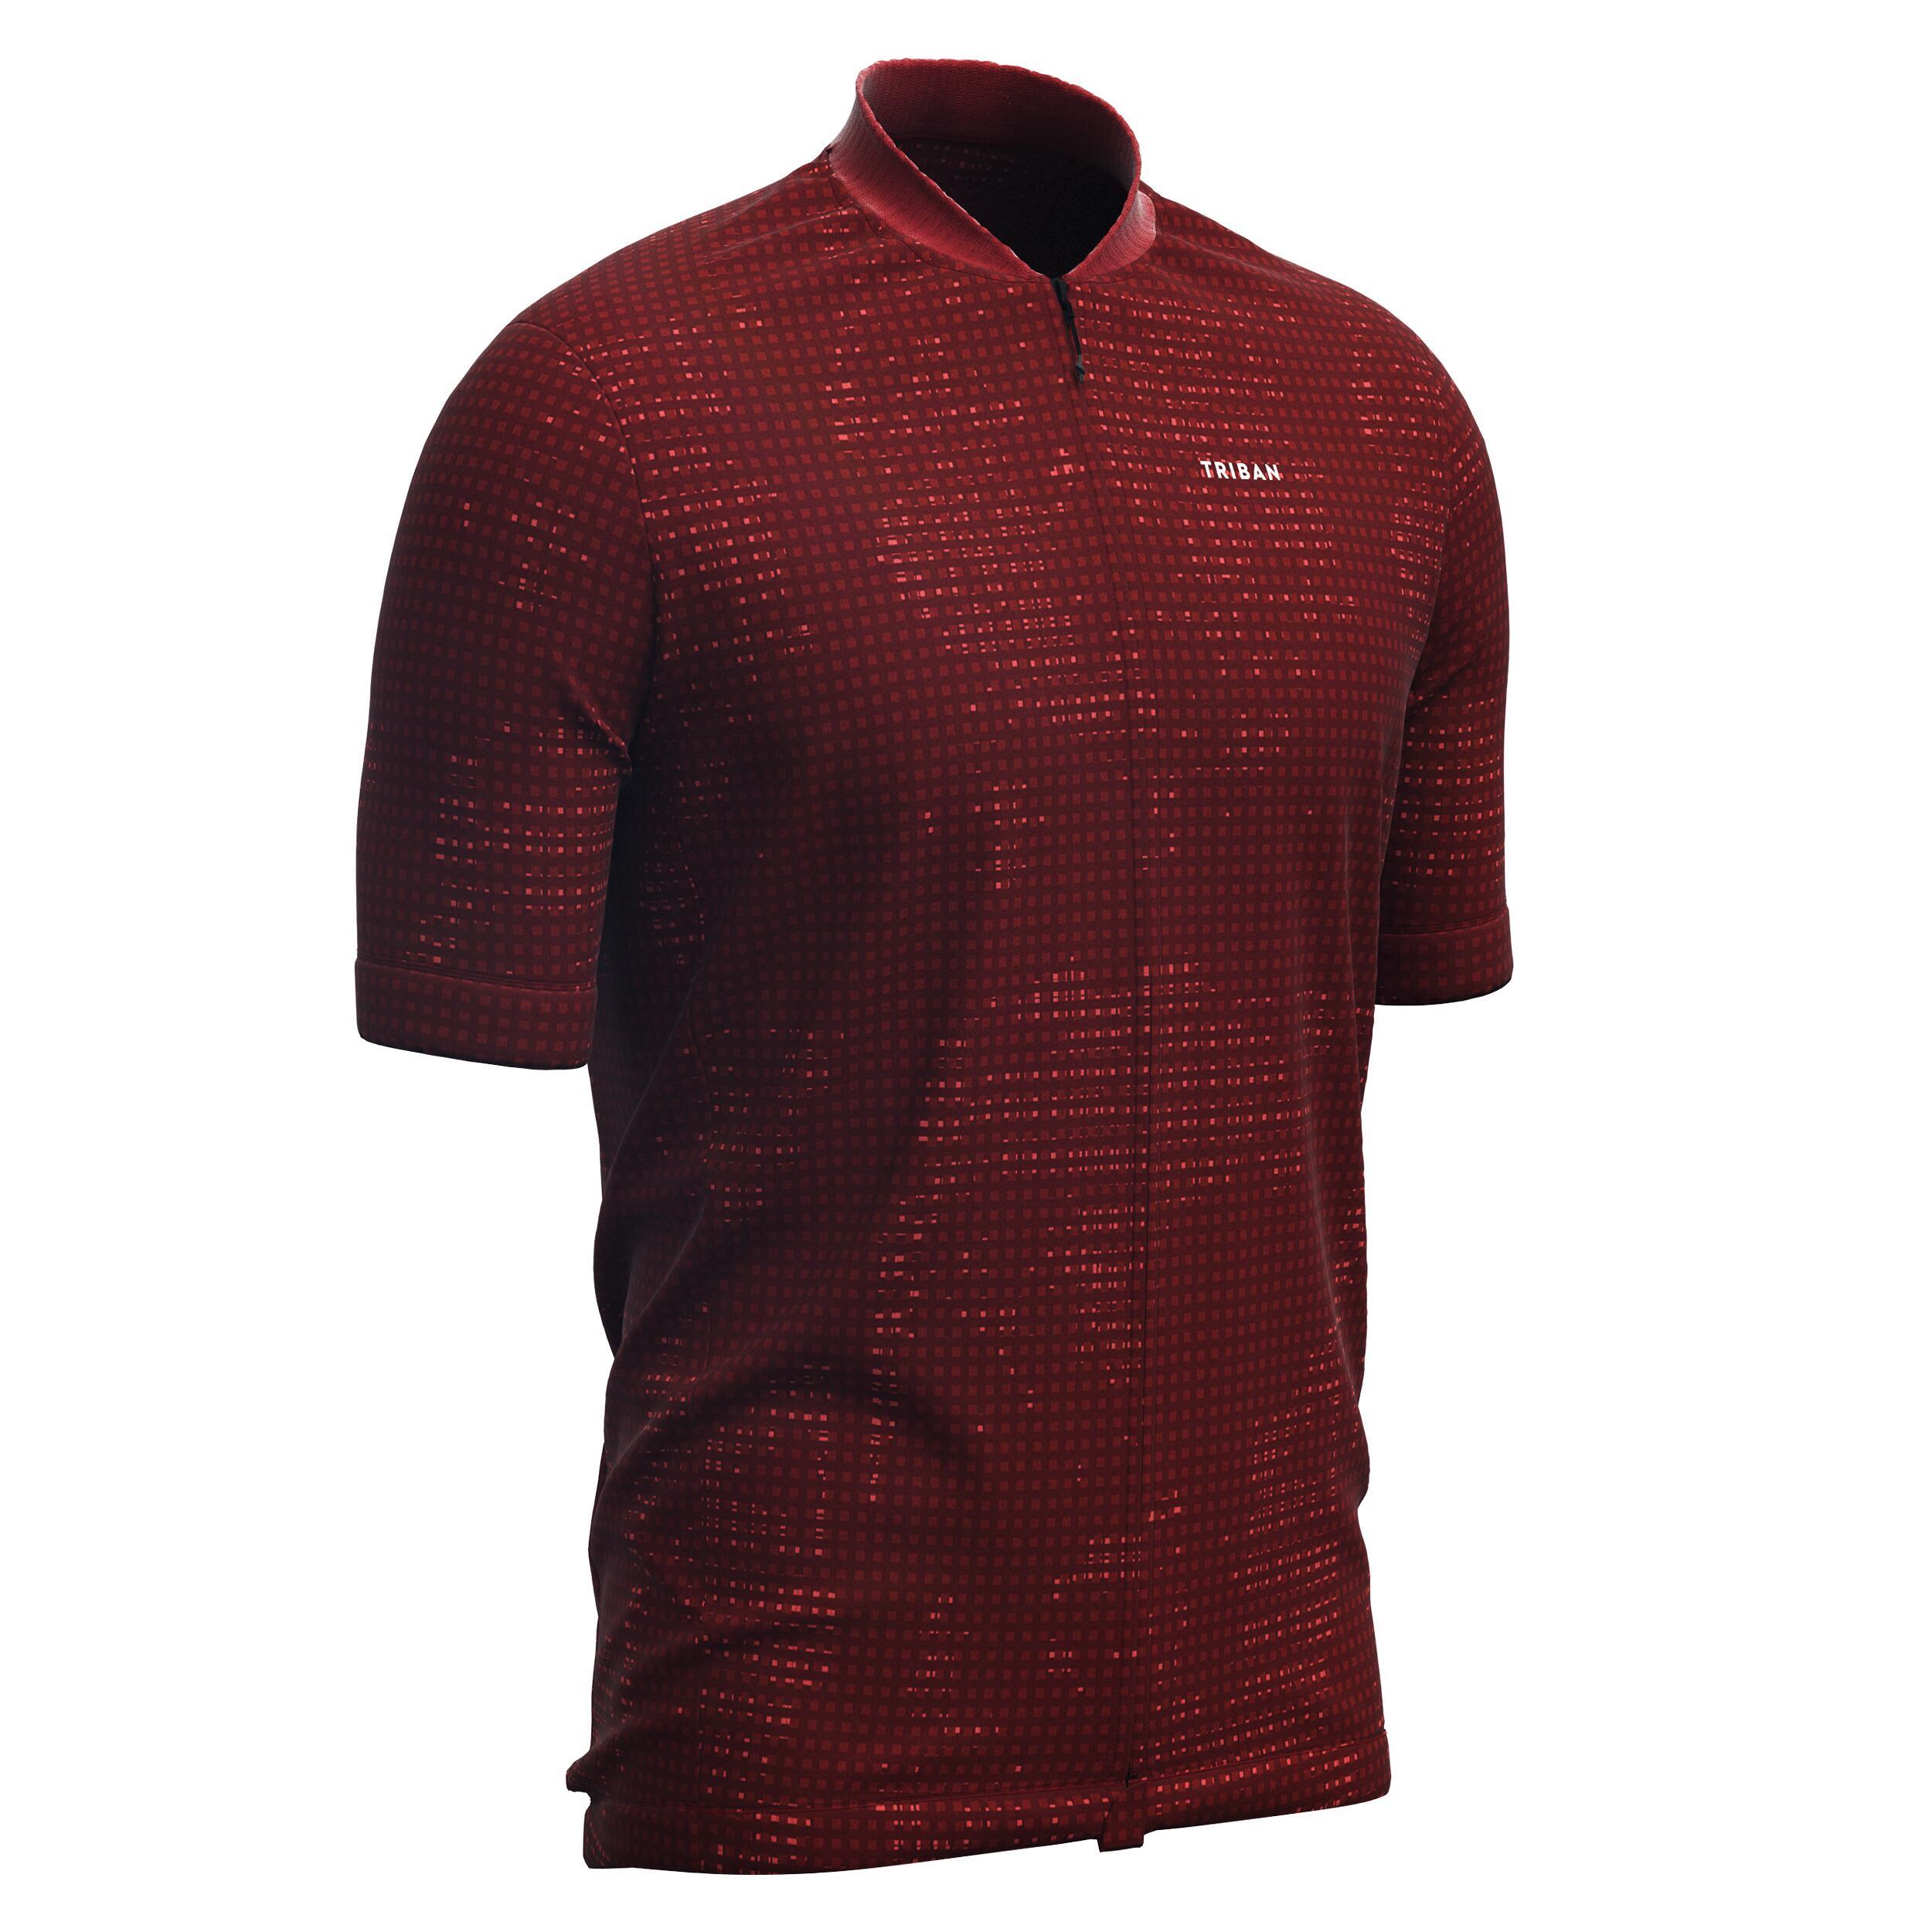 TRIBAN Men's Short-Sleeved Road Cycling Summer Jersey RC100 - Burgundy